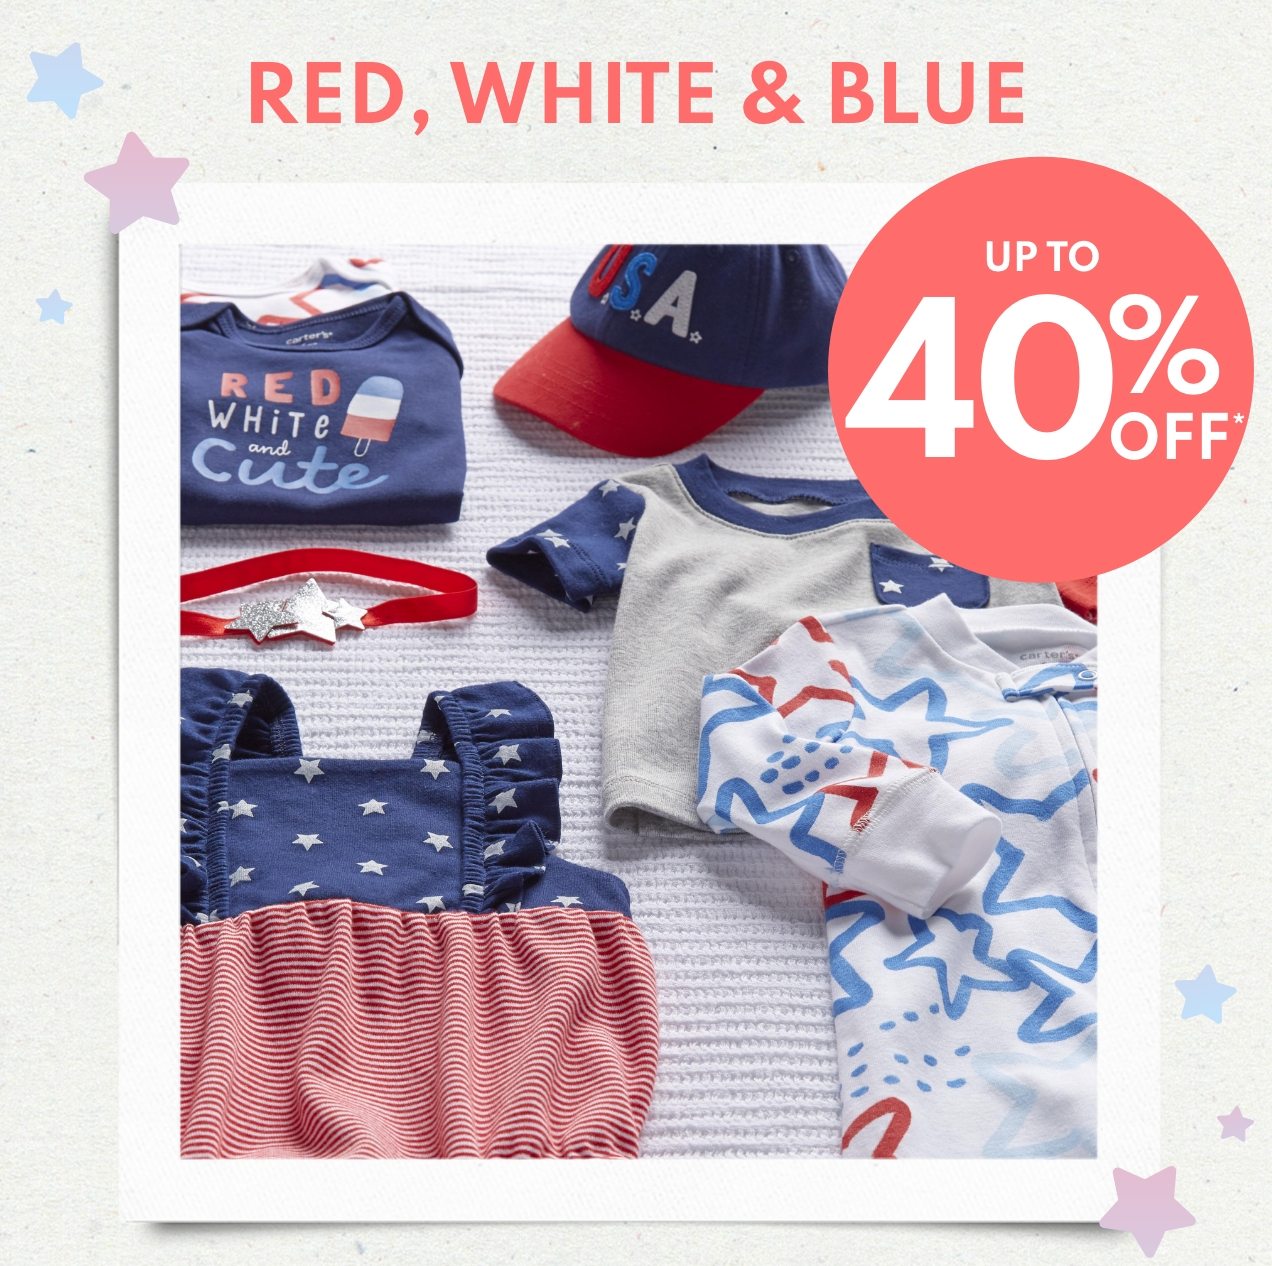 RED, WHITE & BLUE | UP TO 40% OFF